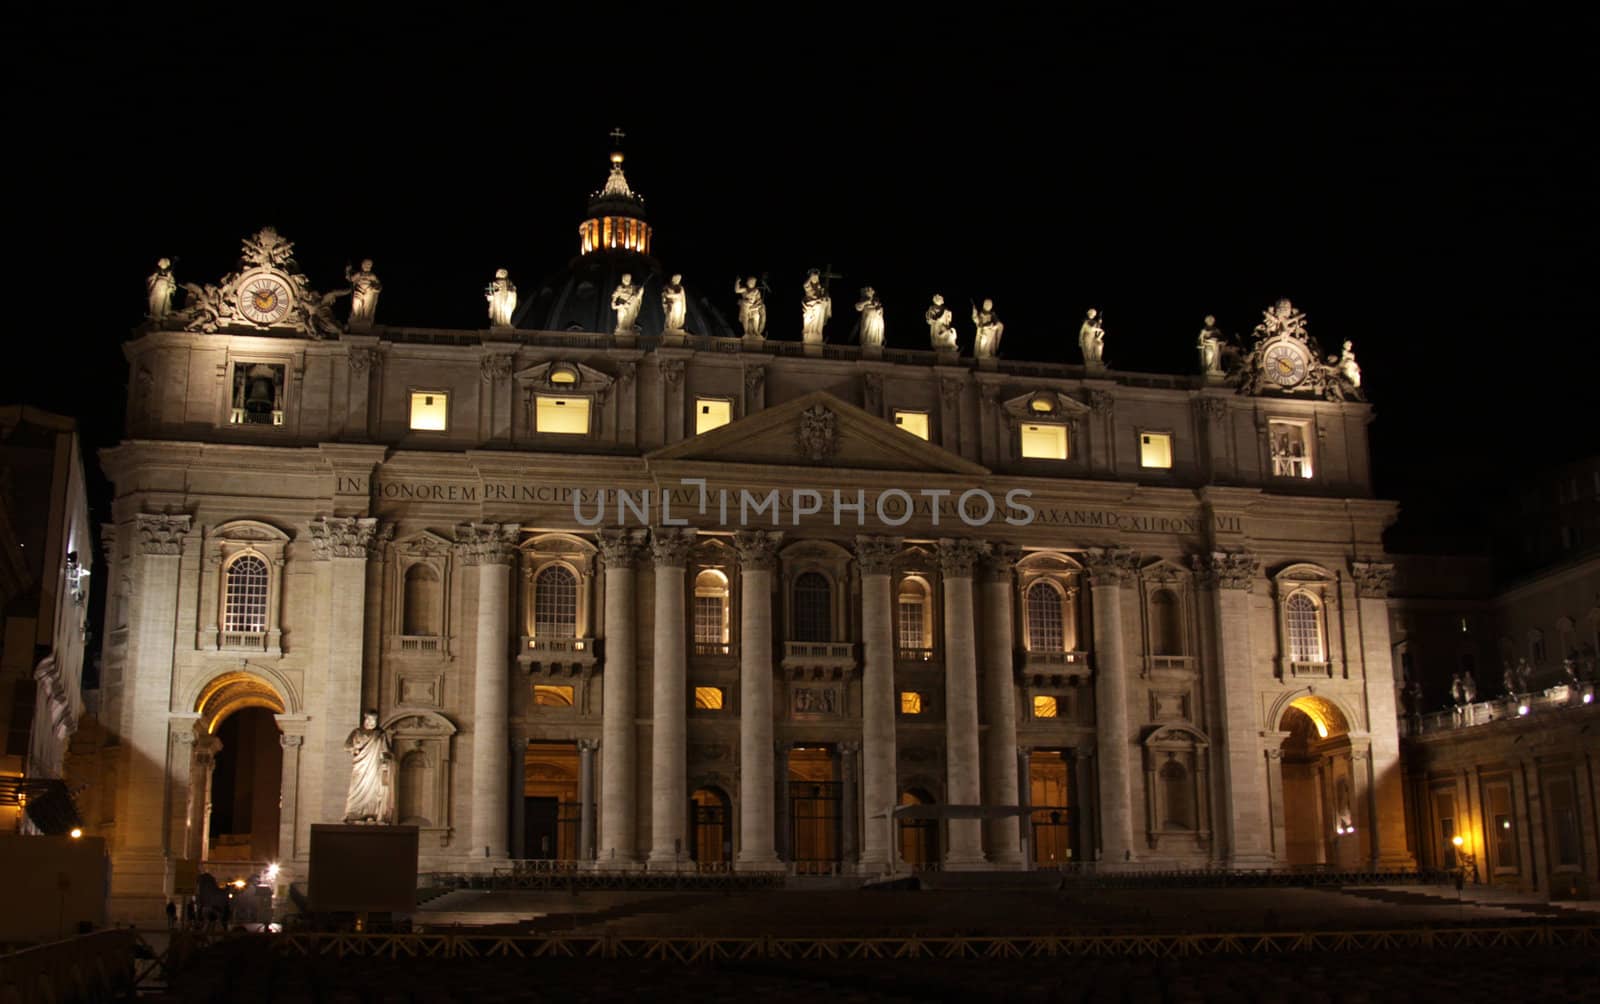 St. Peter's at Night
 by ca2hill